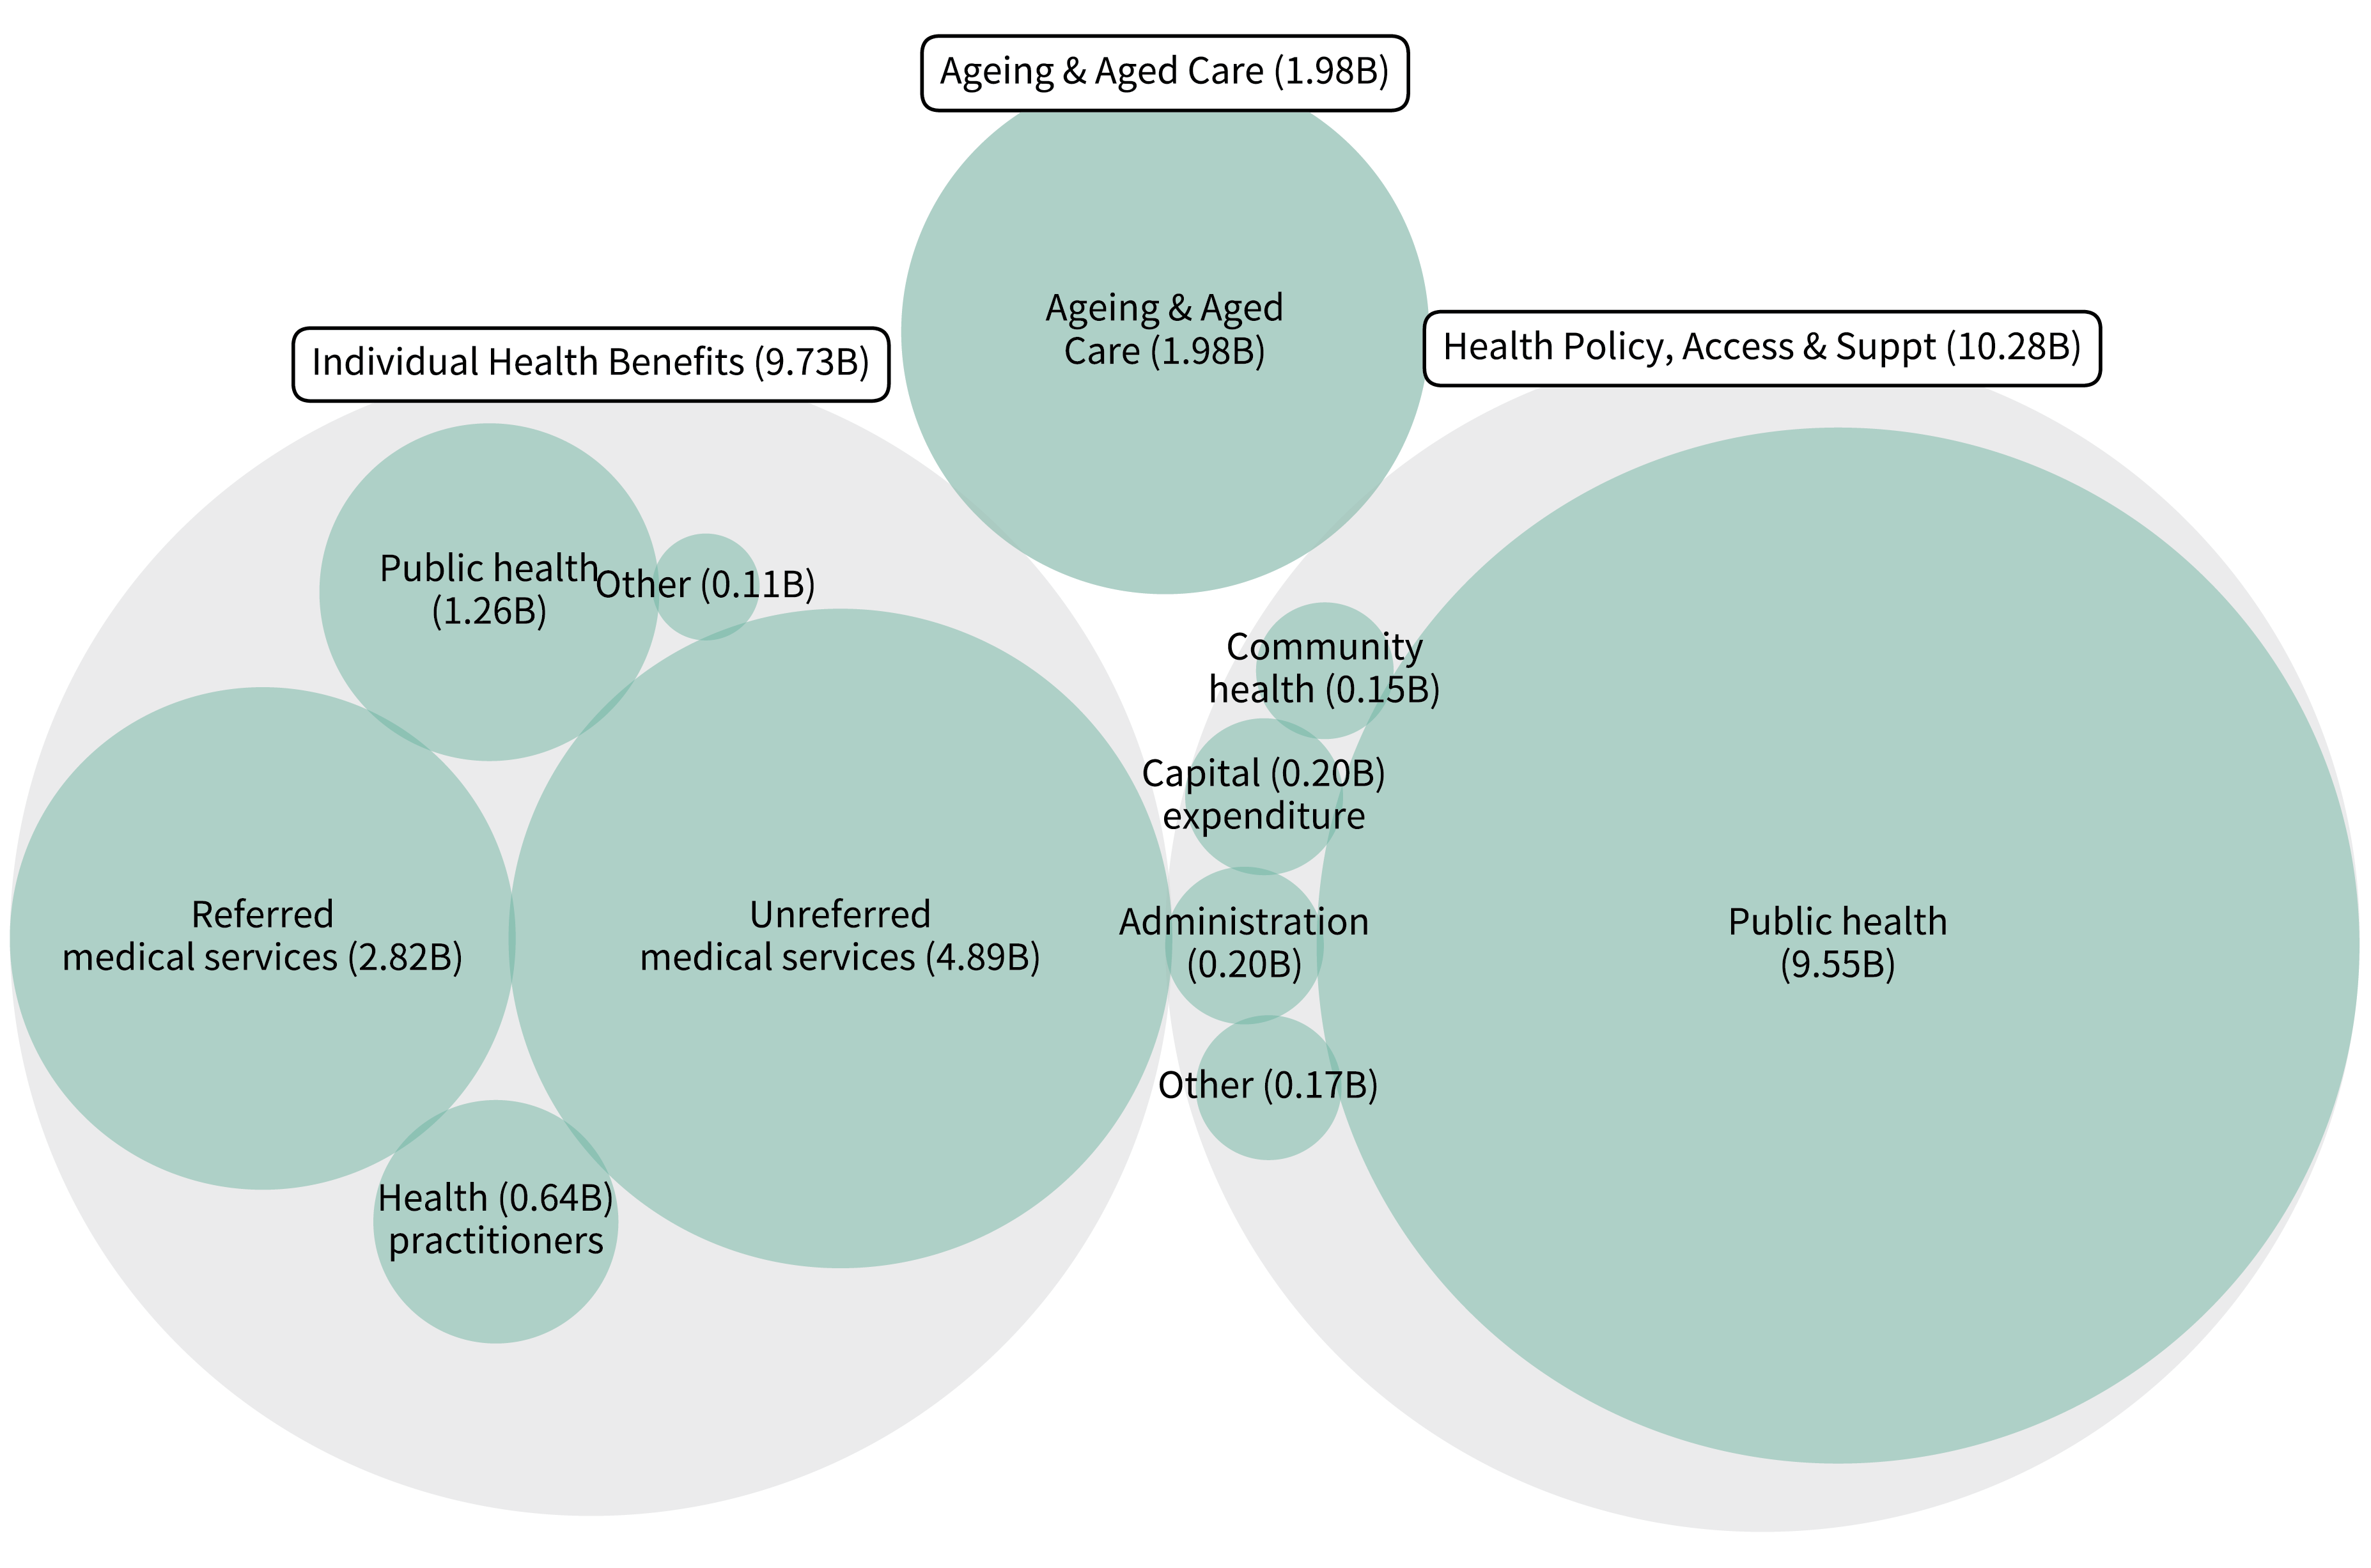 The circular stacked chart shows the total Department of Health and Aged Care spending from 2019-20 to 2021-22 listing programs under individual health benefits, ageing and aged care, health policy, access and support. The highest spending was for public health activities followed by unreferred medical services and referred medical services. The other areas included community health, health practitioners, administration, capital expenditure and others.